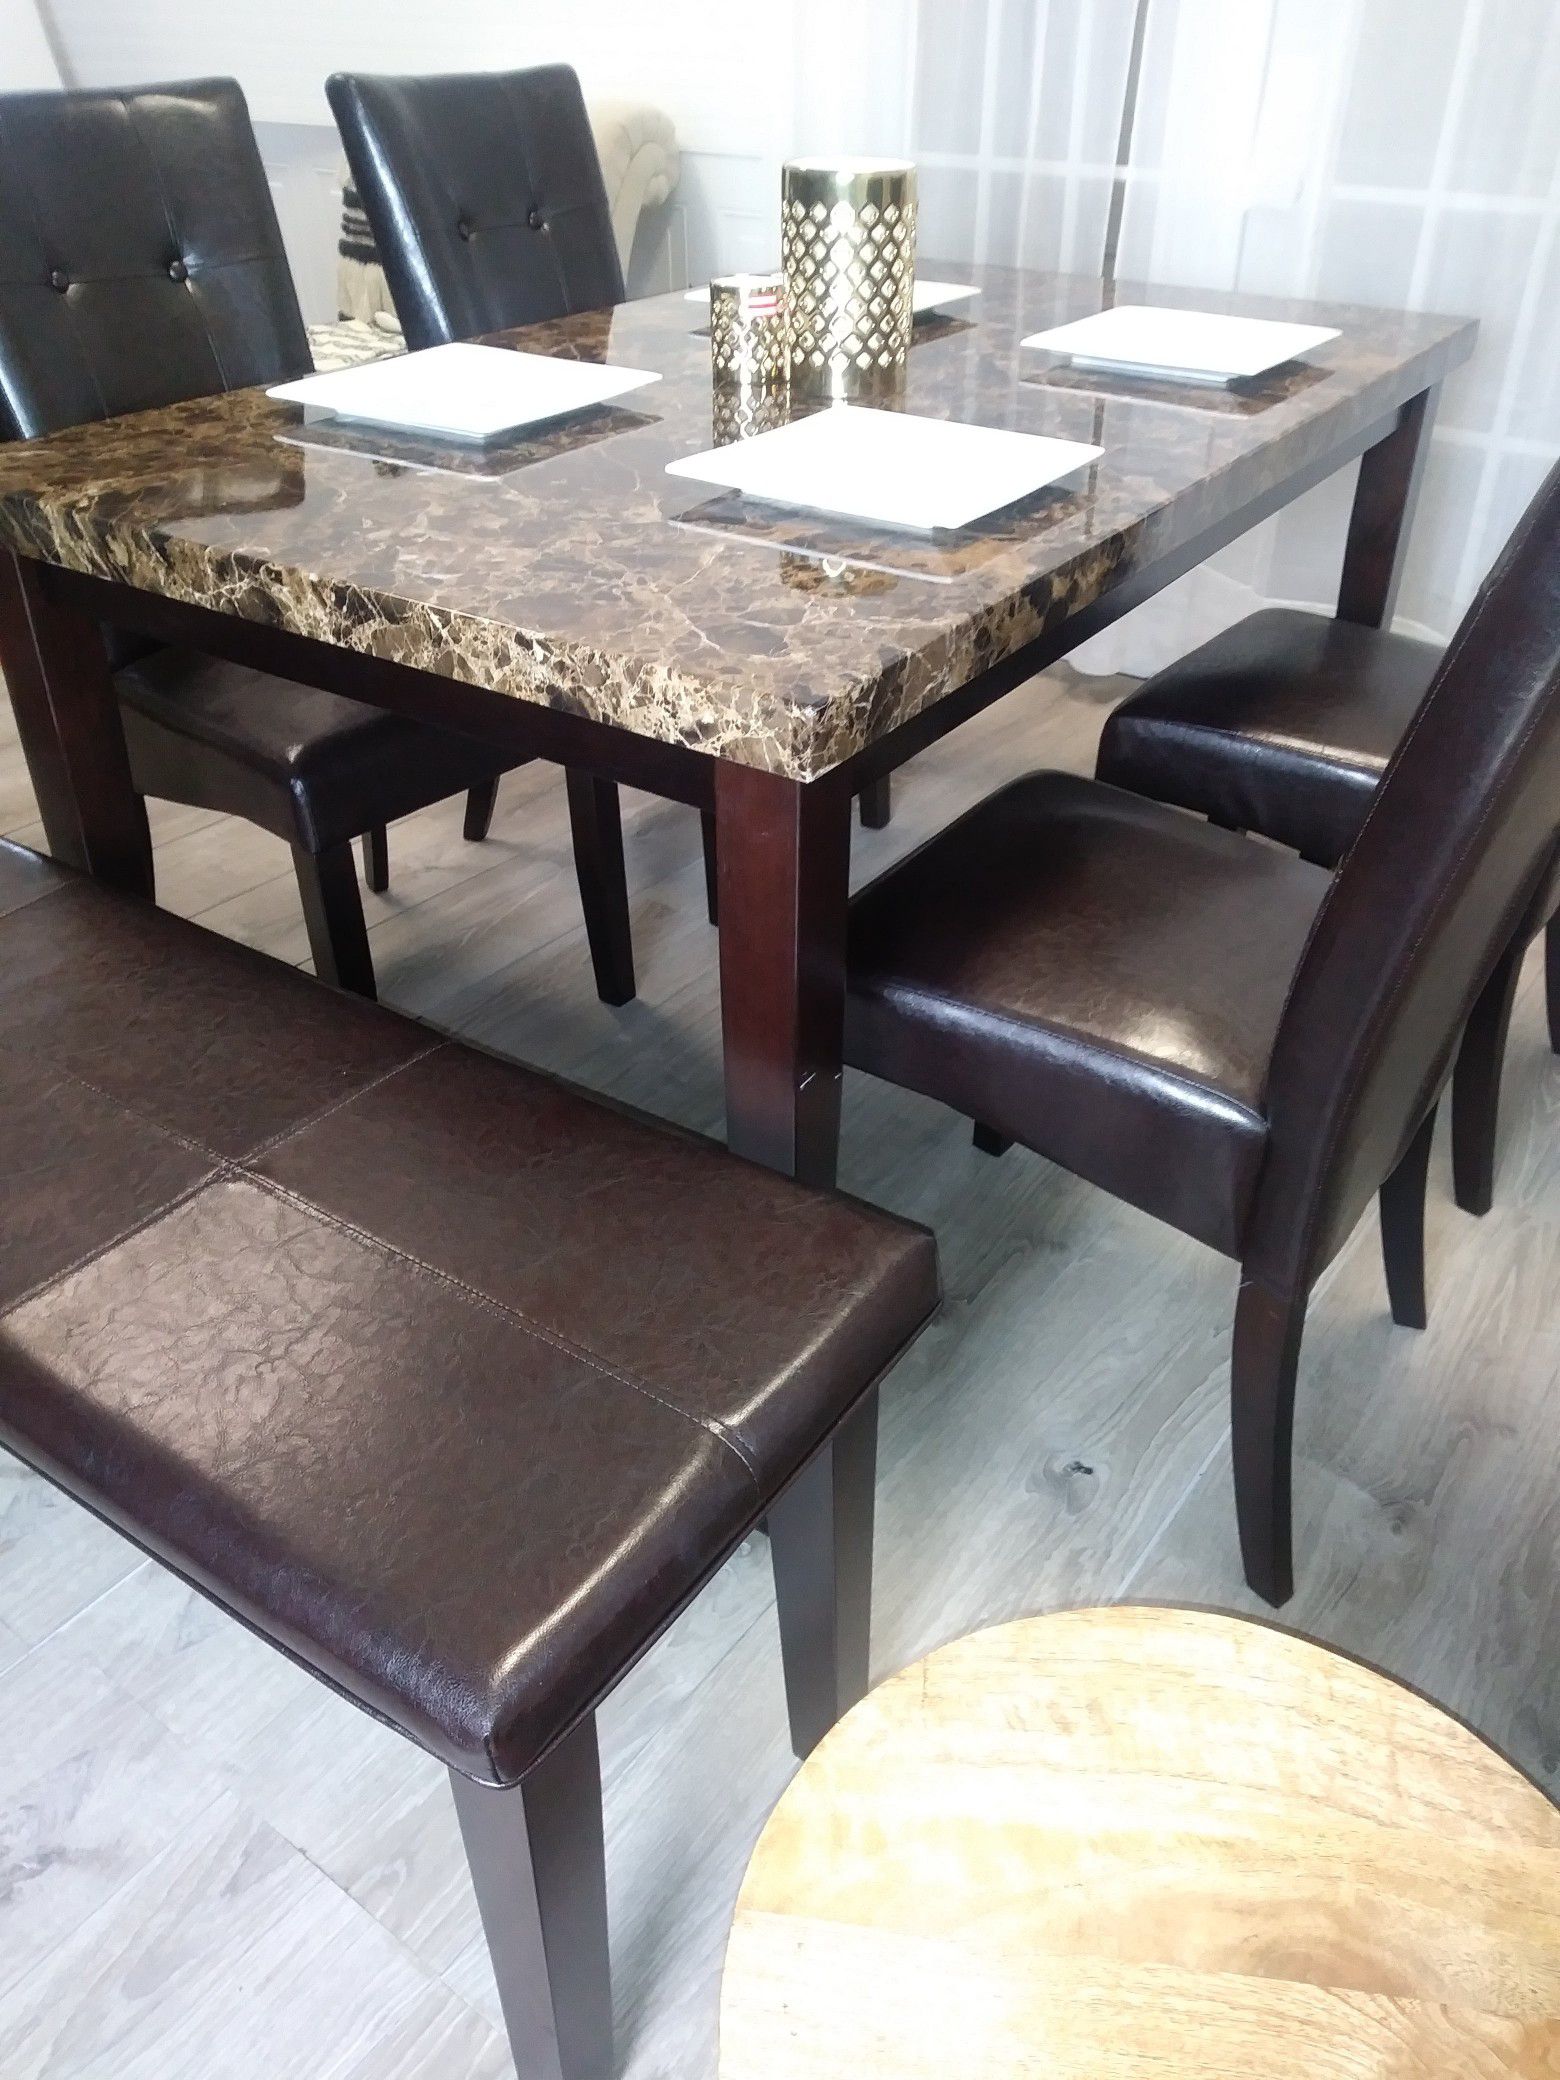 New Marble Top Kitchen Tables Dining Room Table Four Chairs And A Bench